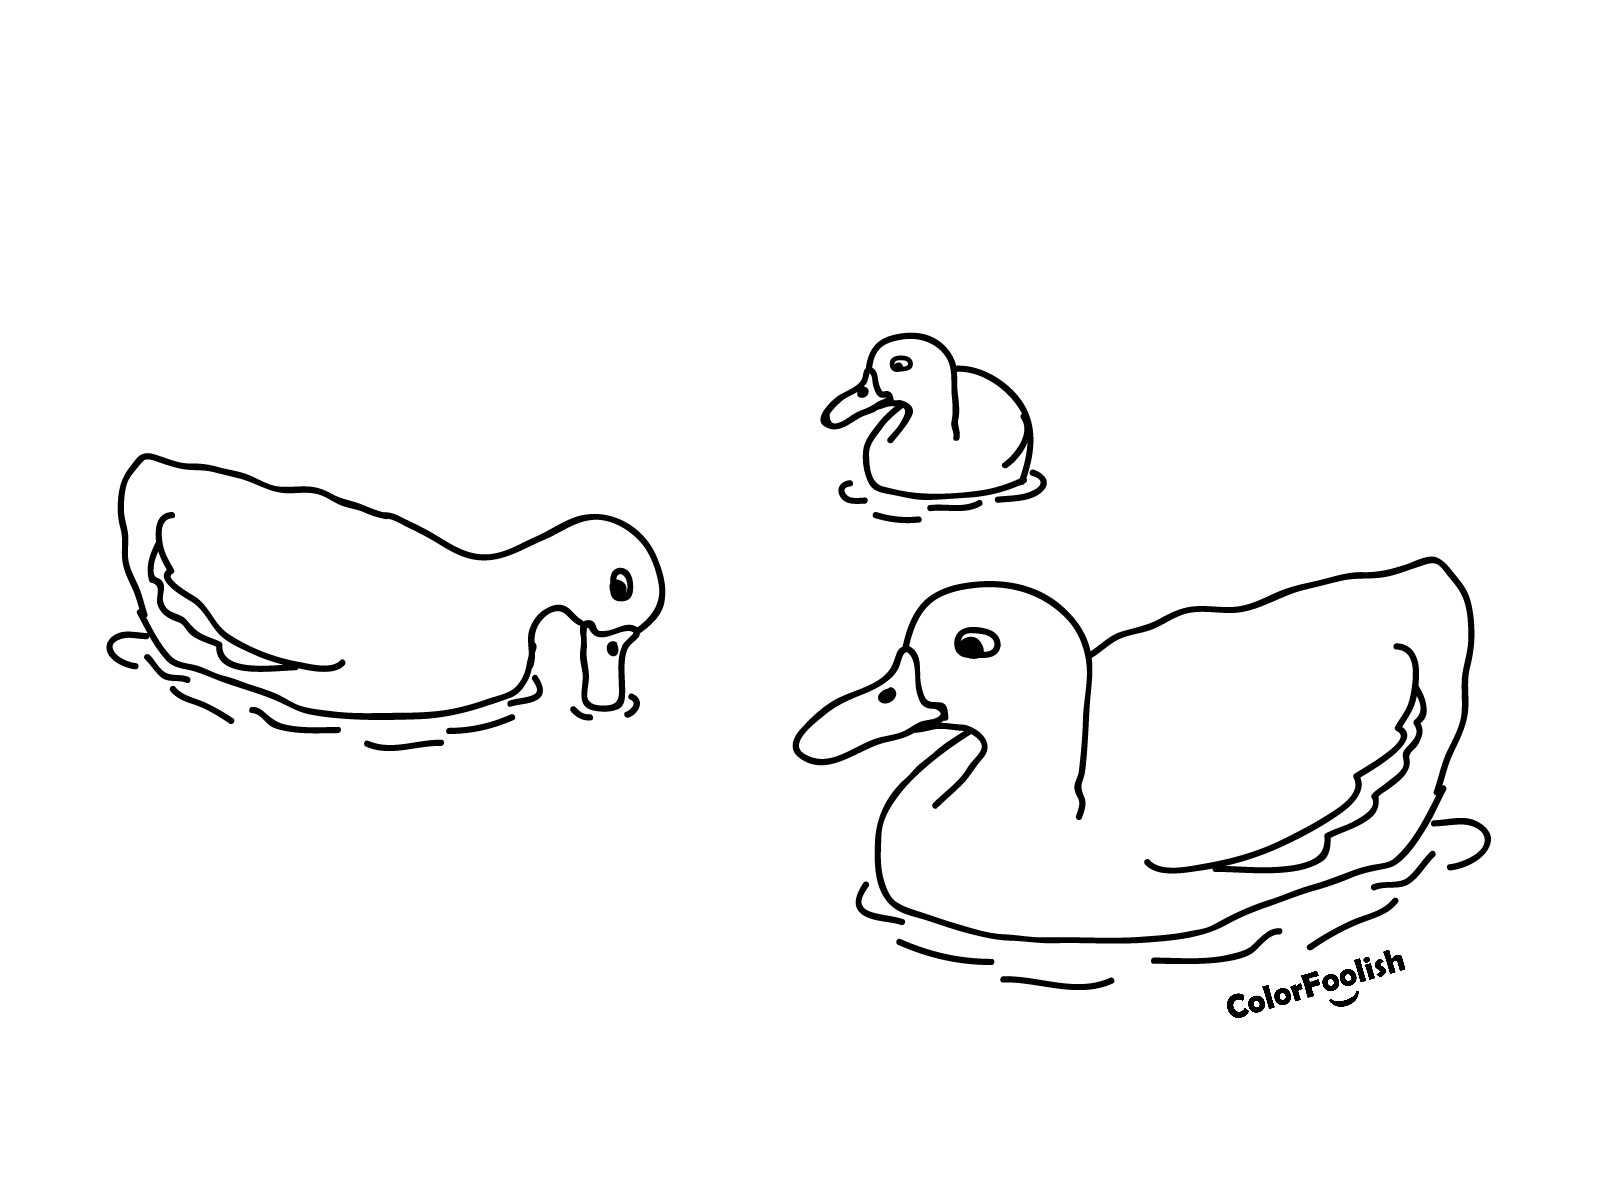 Coloring page of ducks in water